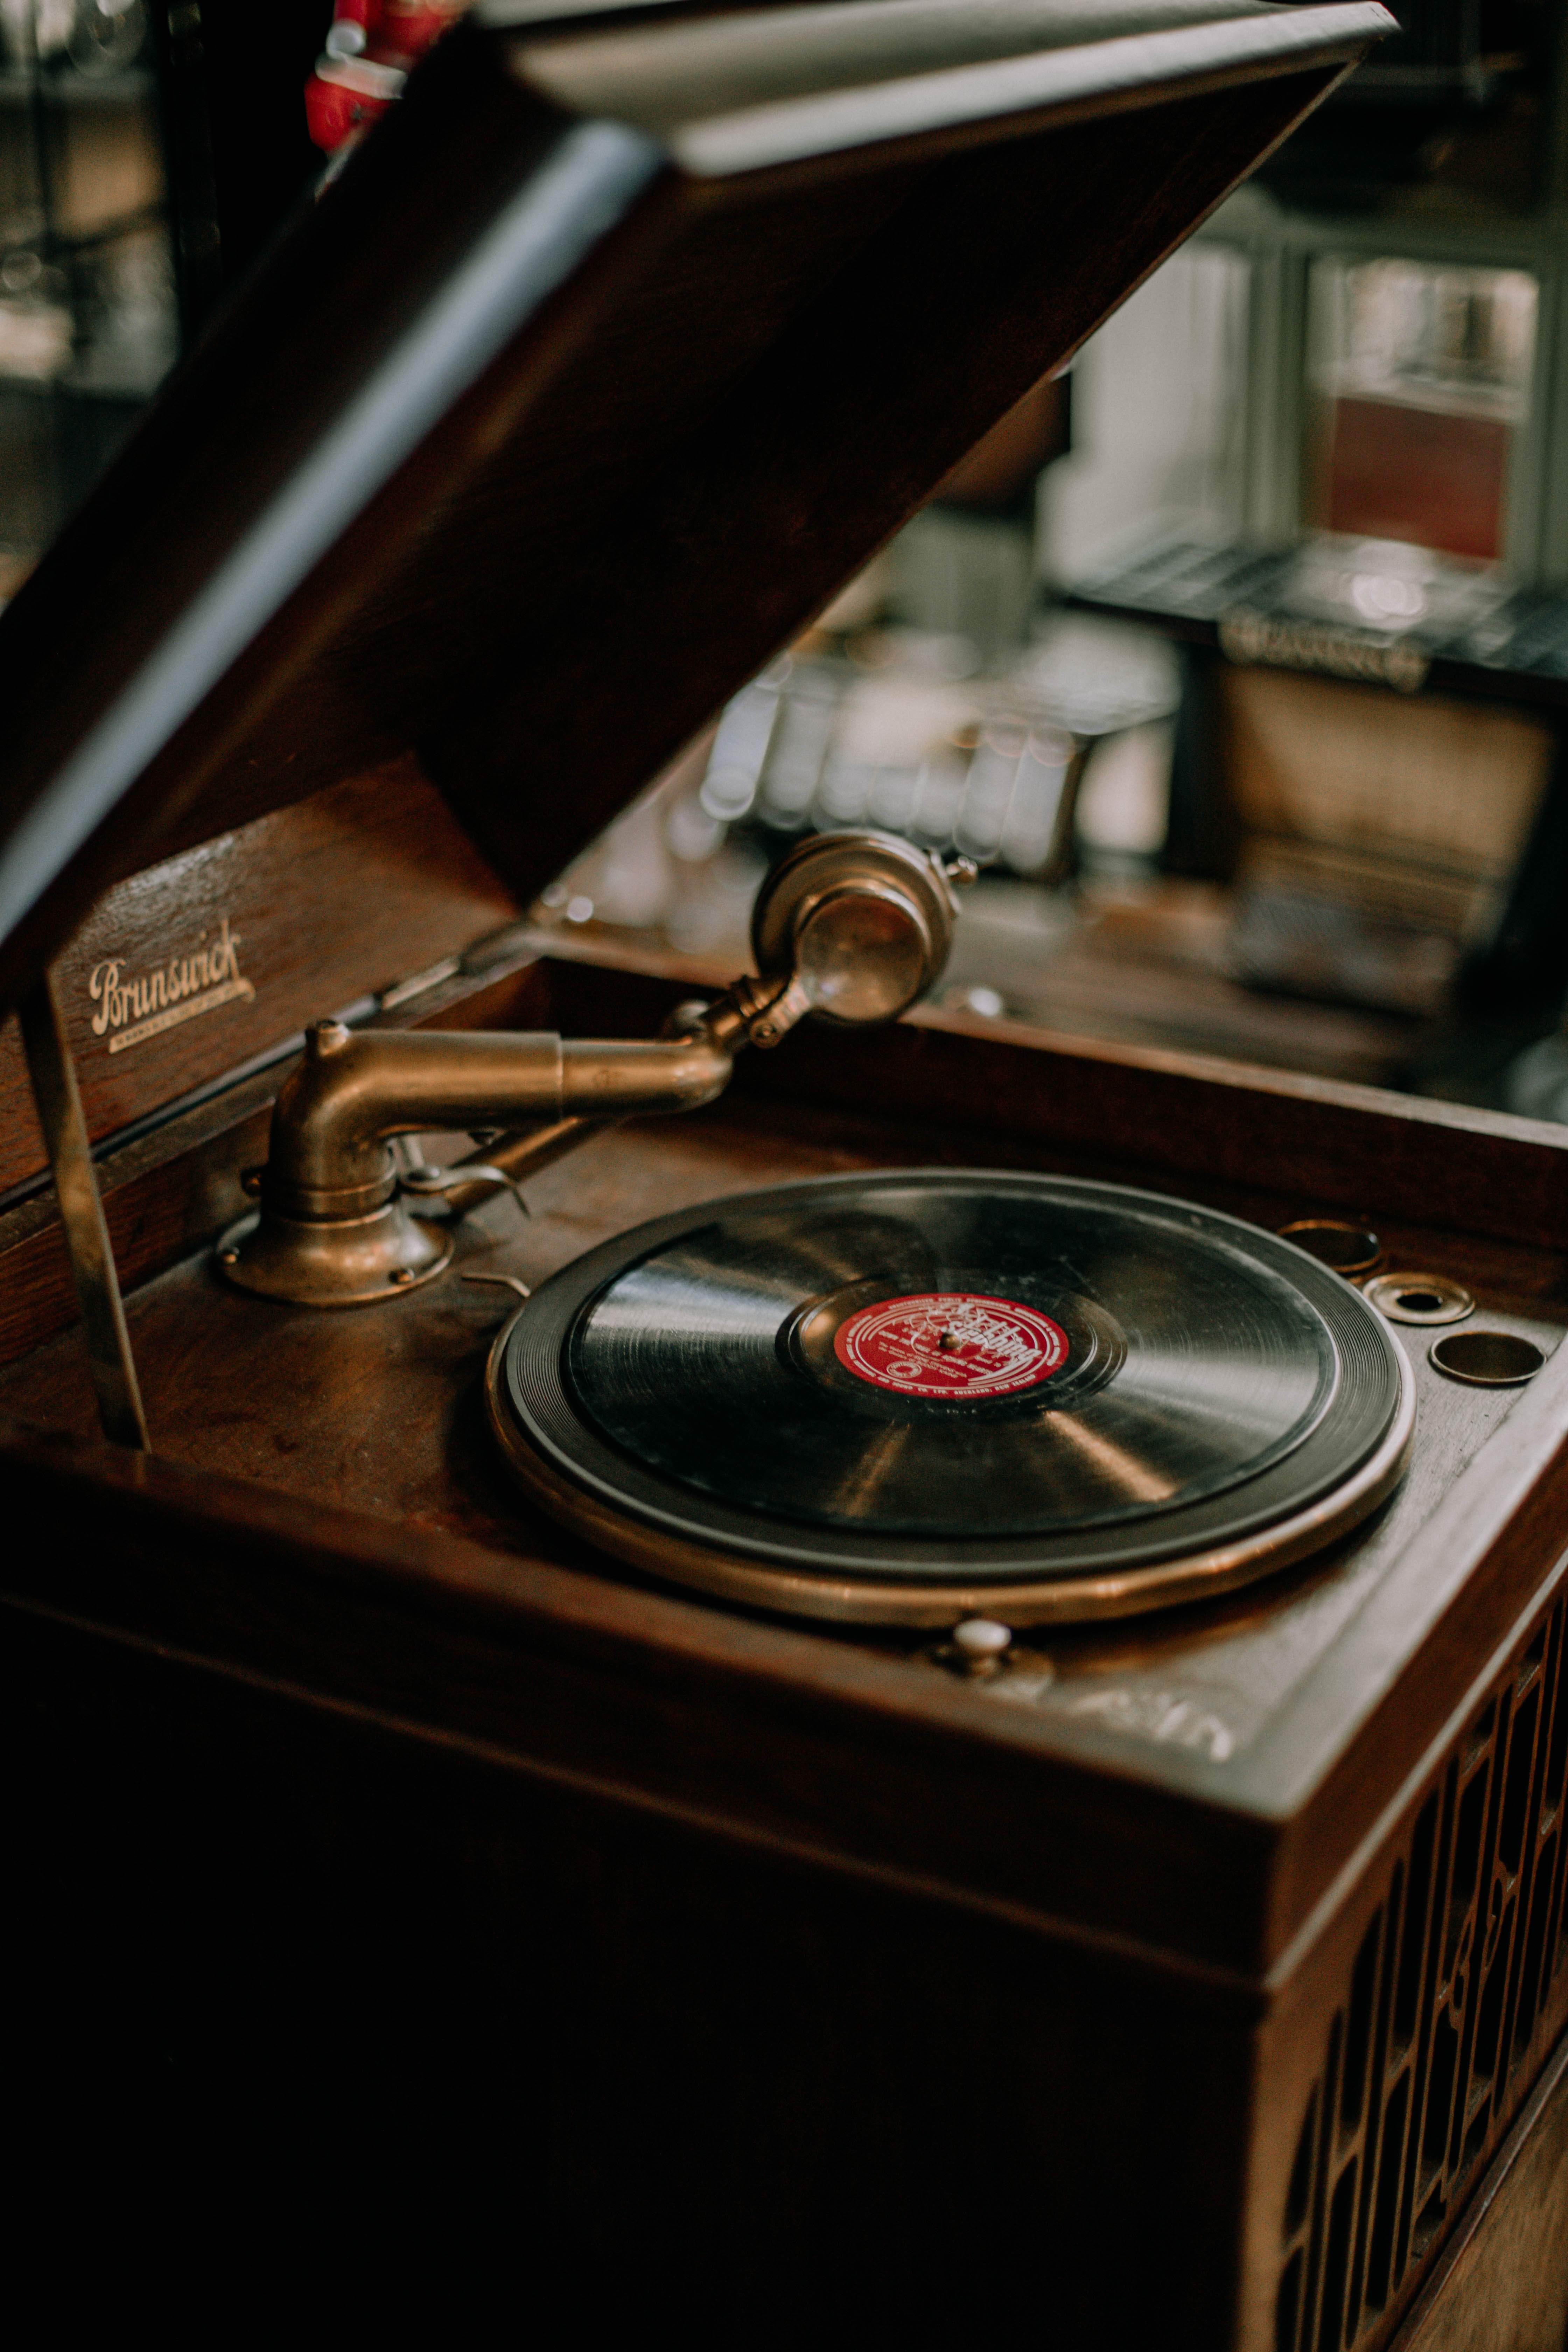 53663 download wallpaper music, plate, retro, vinyl player, vinyl screensavers and pictures for free